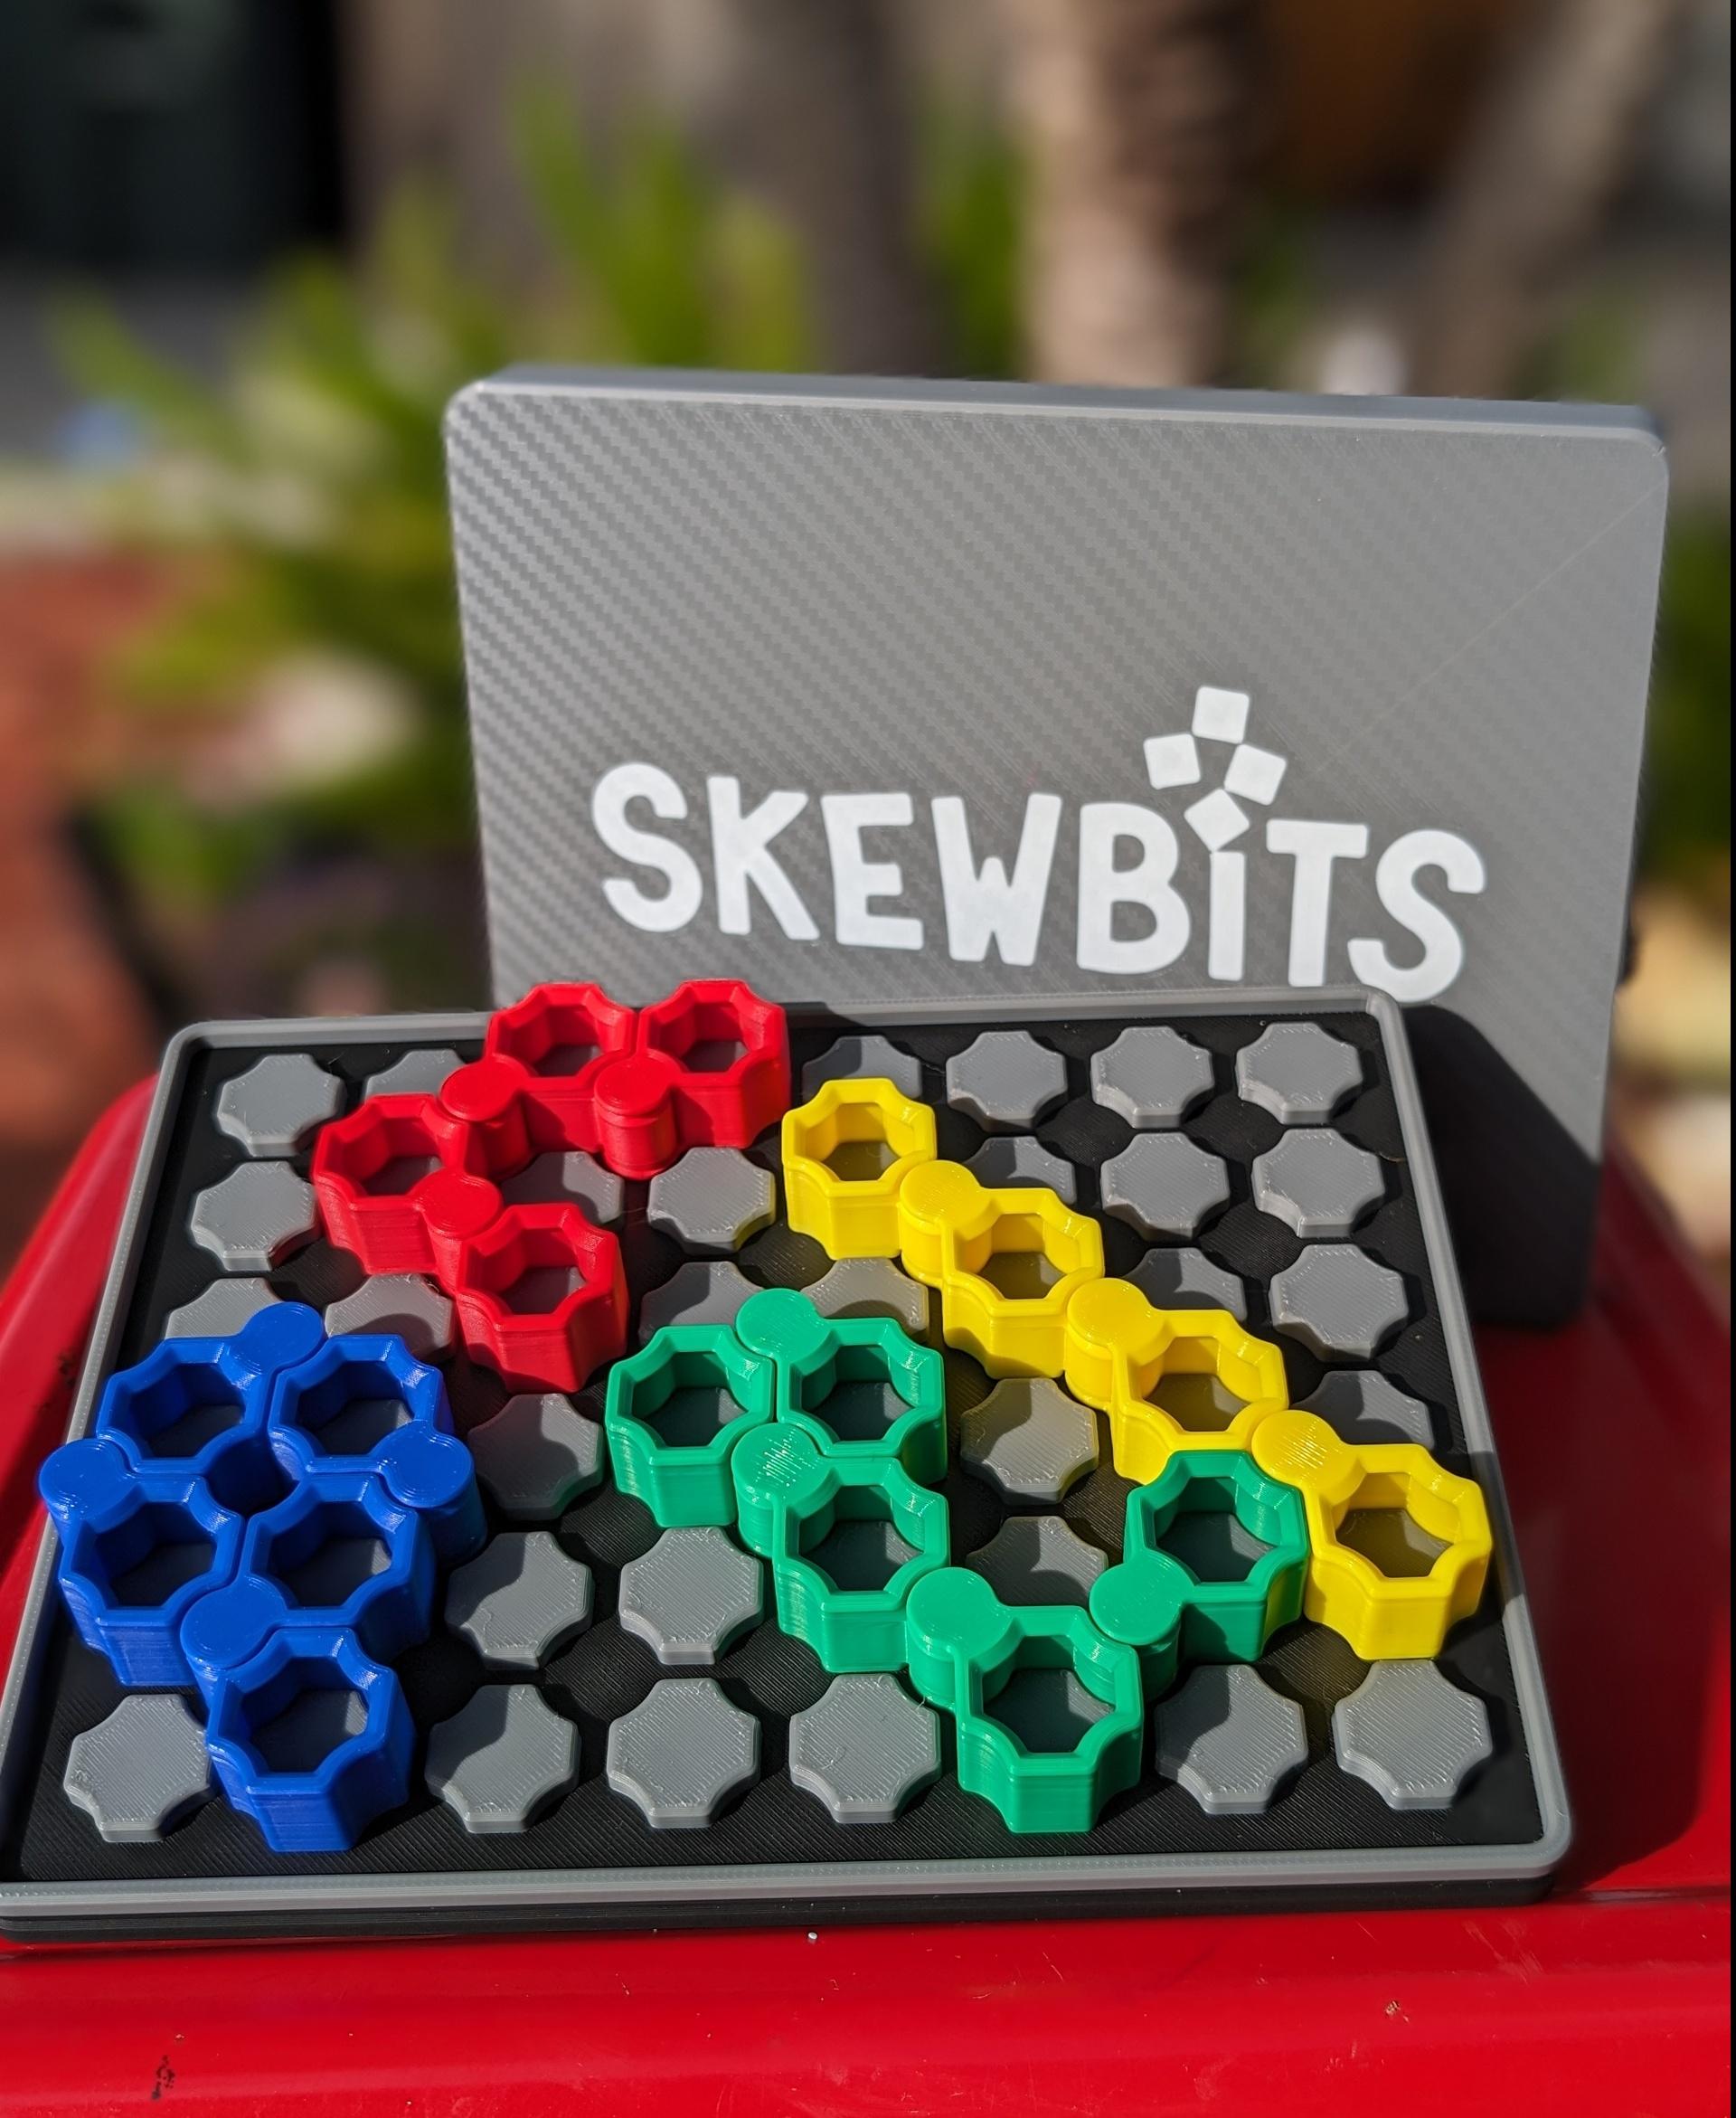 SKEWBITS v2.0 Puzzle Game // Full Set w. Problems 001-050 - Amazing puzzle game. Printed the lid with a carbon fiber pattern to great effect. - 3d model